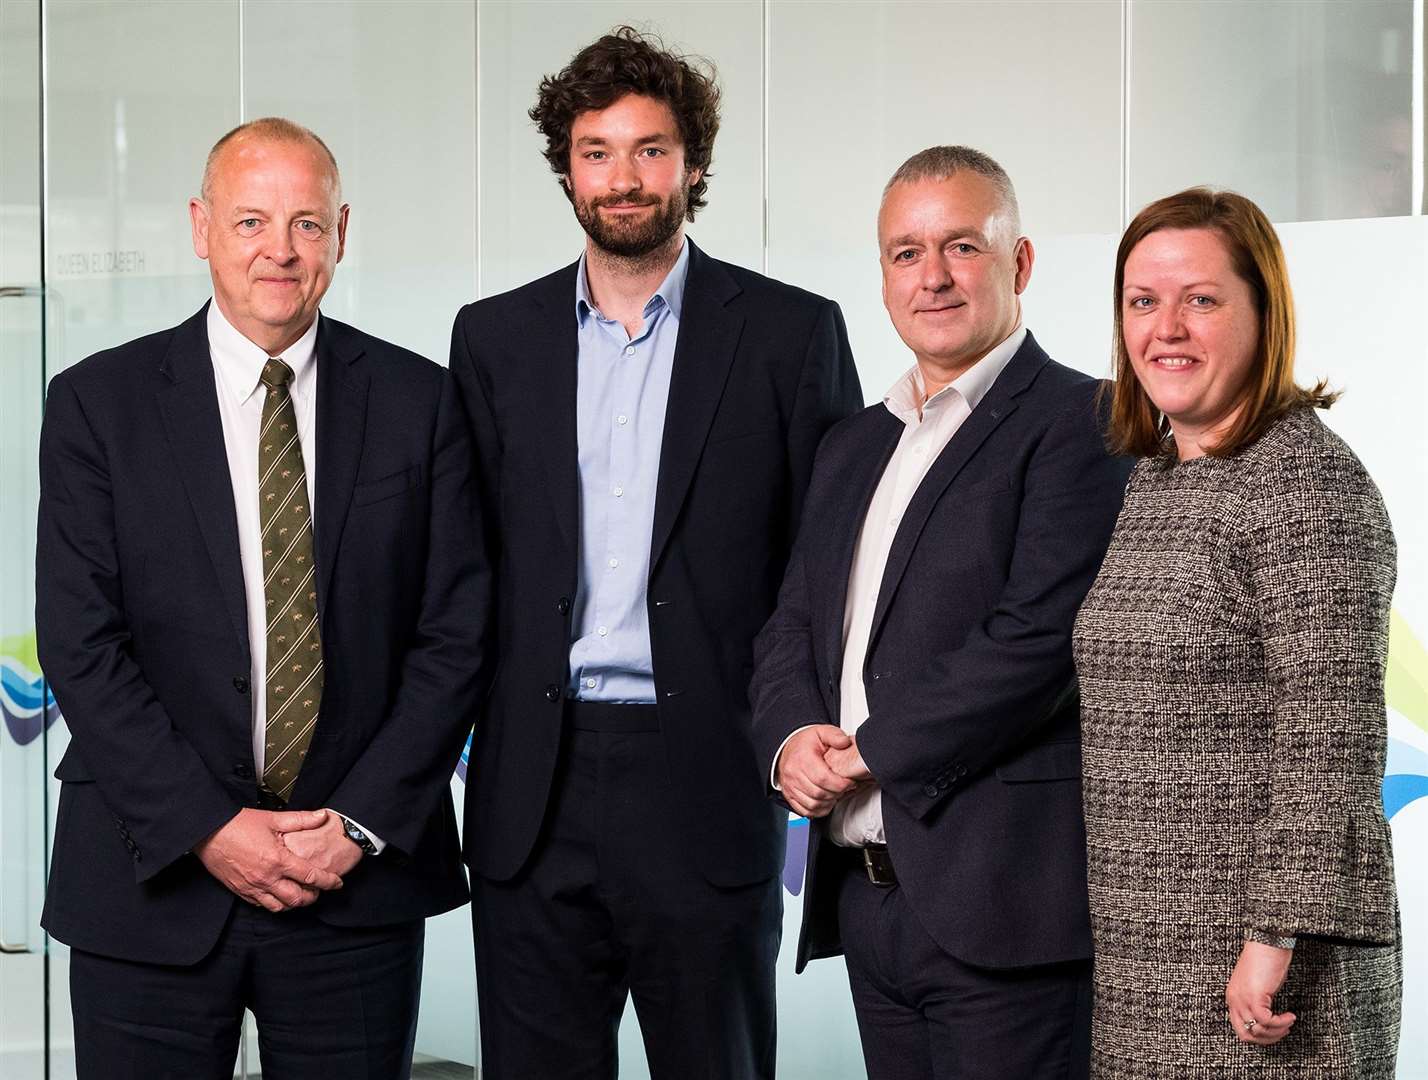 SSEN’s Colin Nicol (left) and Lyndsey Stainton (right) with Jamie Stewart and Derek Mitchell of Citizens Advice Scotland.